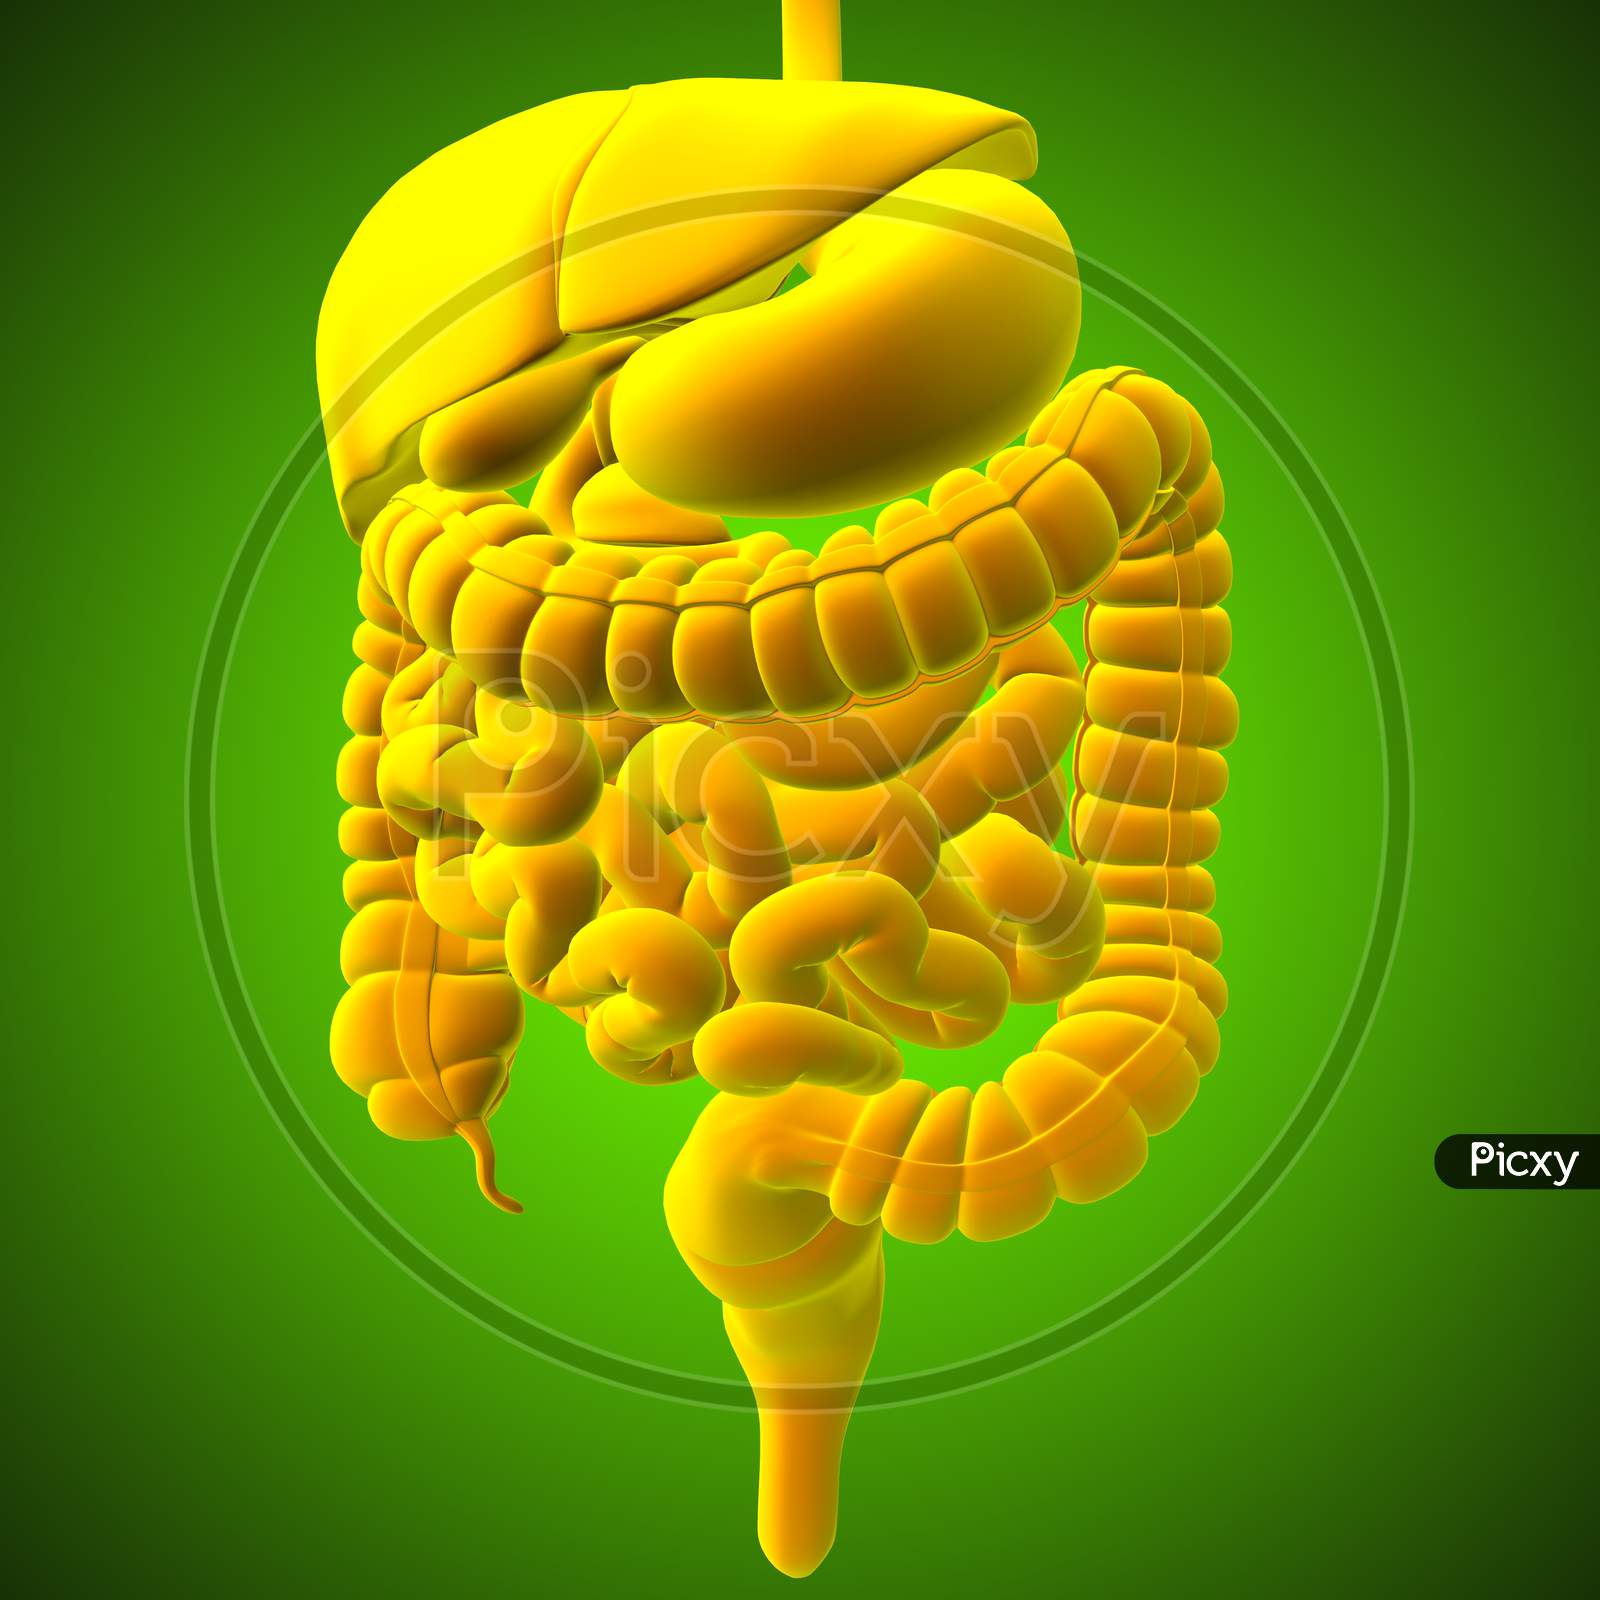 Human Digestive System Anatomy For Medical Concept 3D Rendering